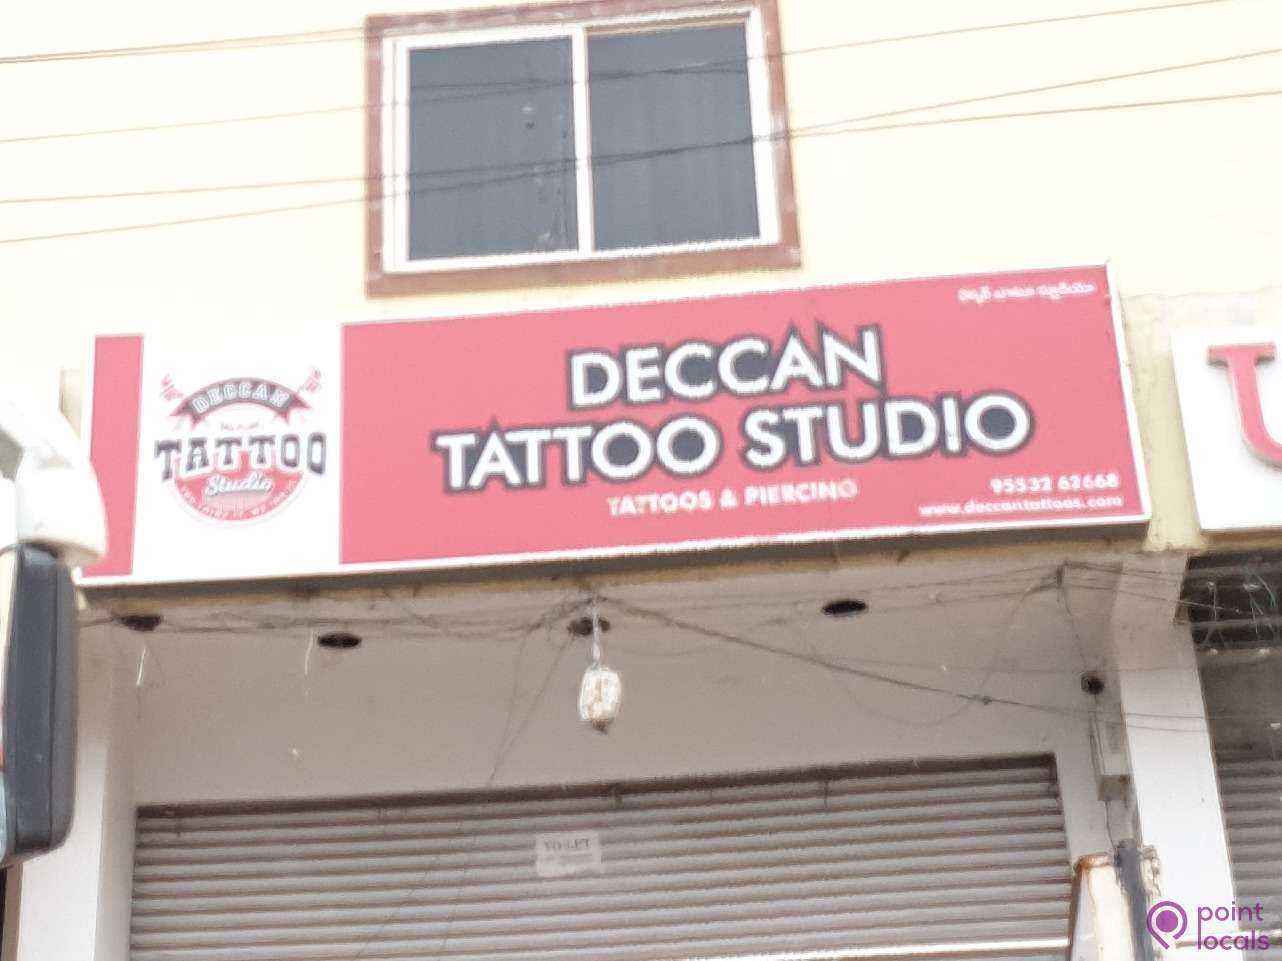 Temporarily Tattoo in Uppal,Hyderabad - Best Tattoo Parlours in Hyderabad -  Justdial